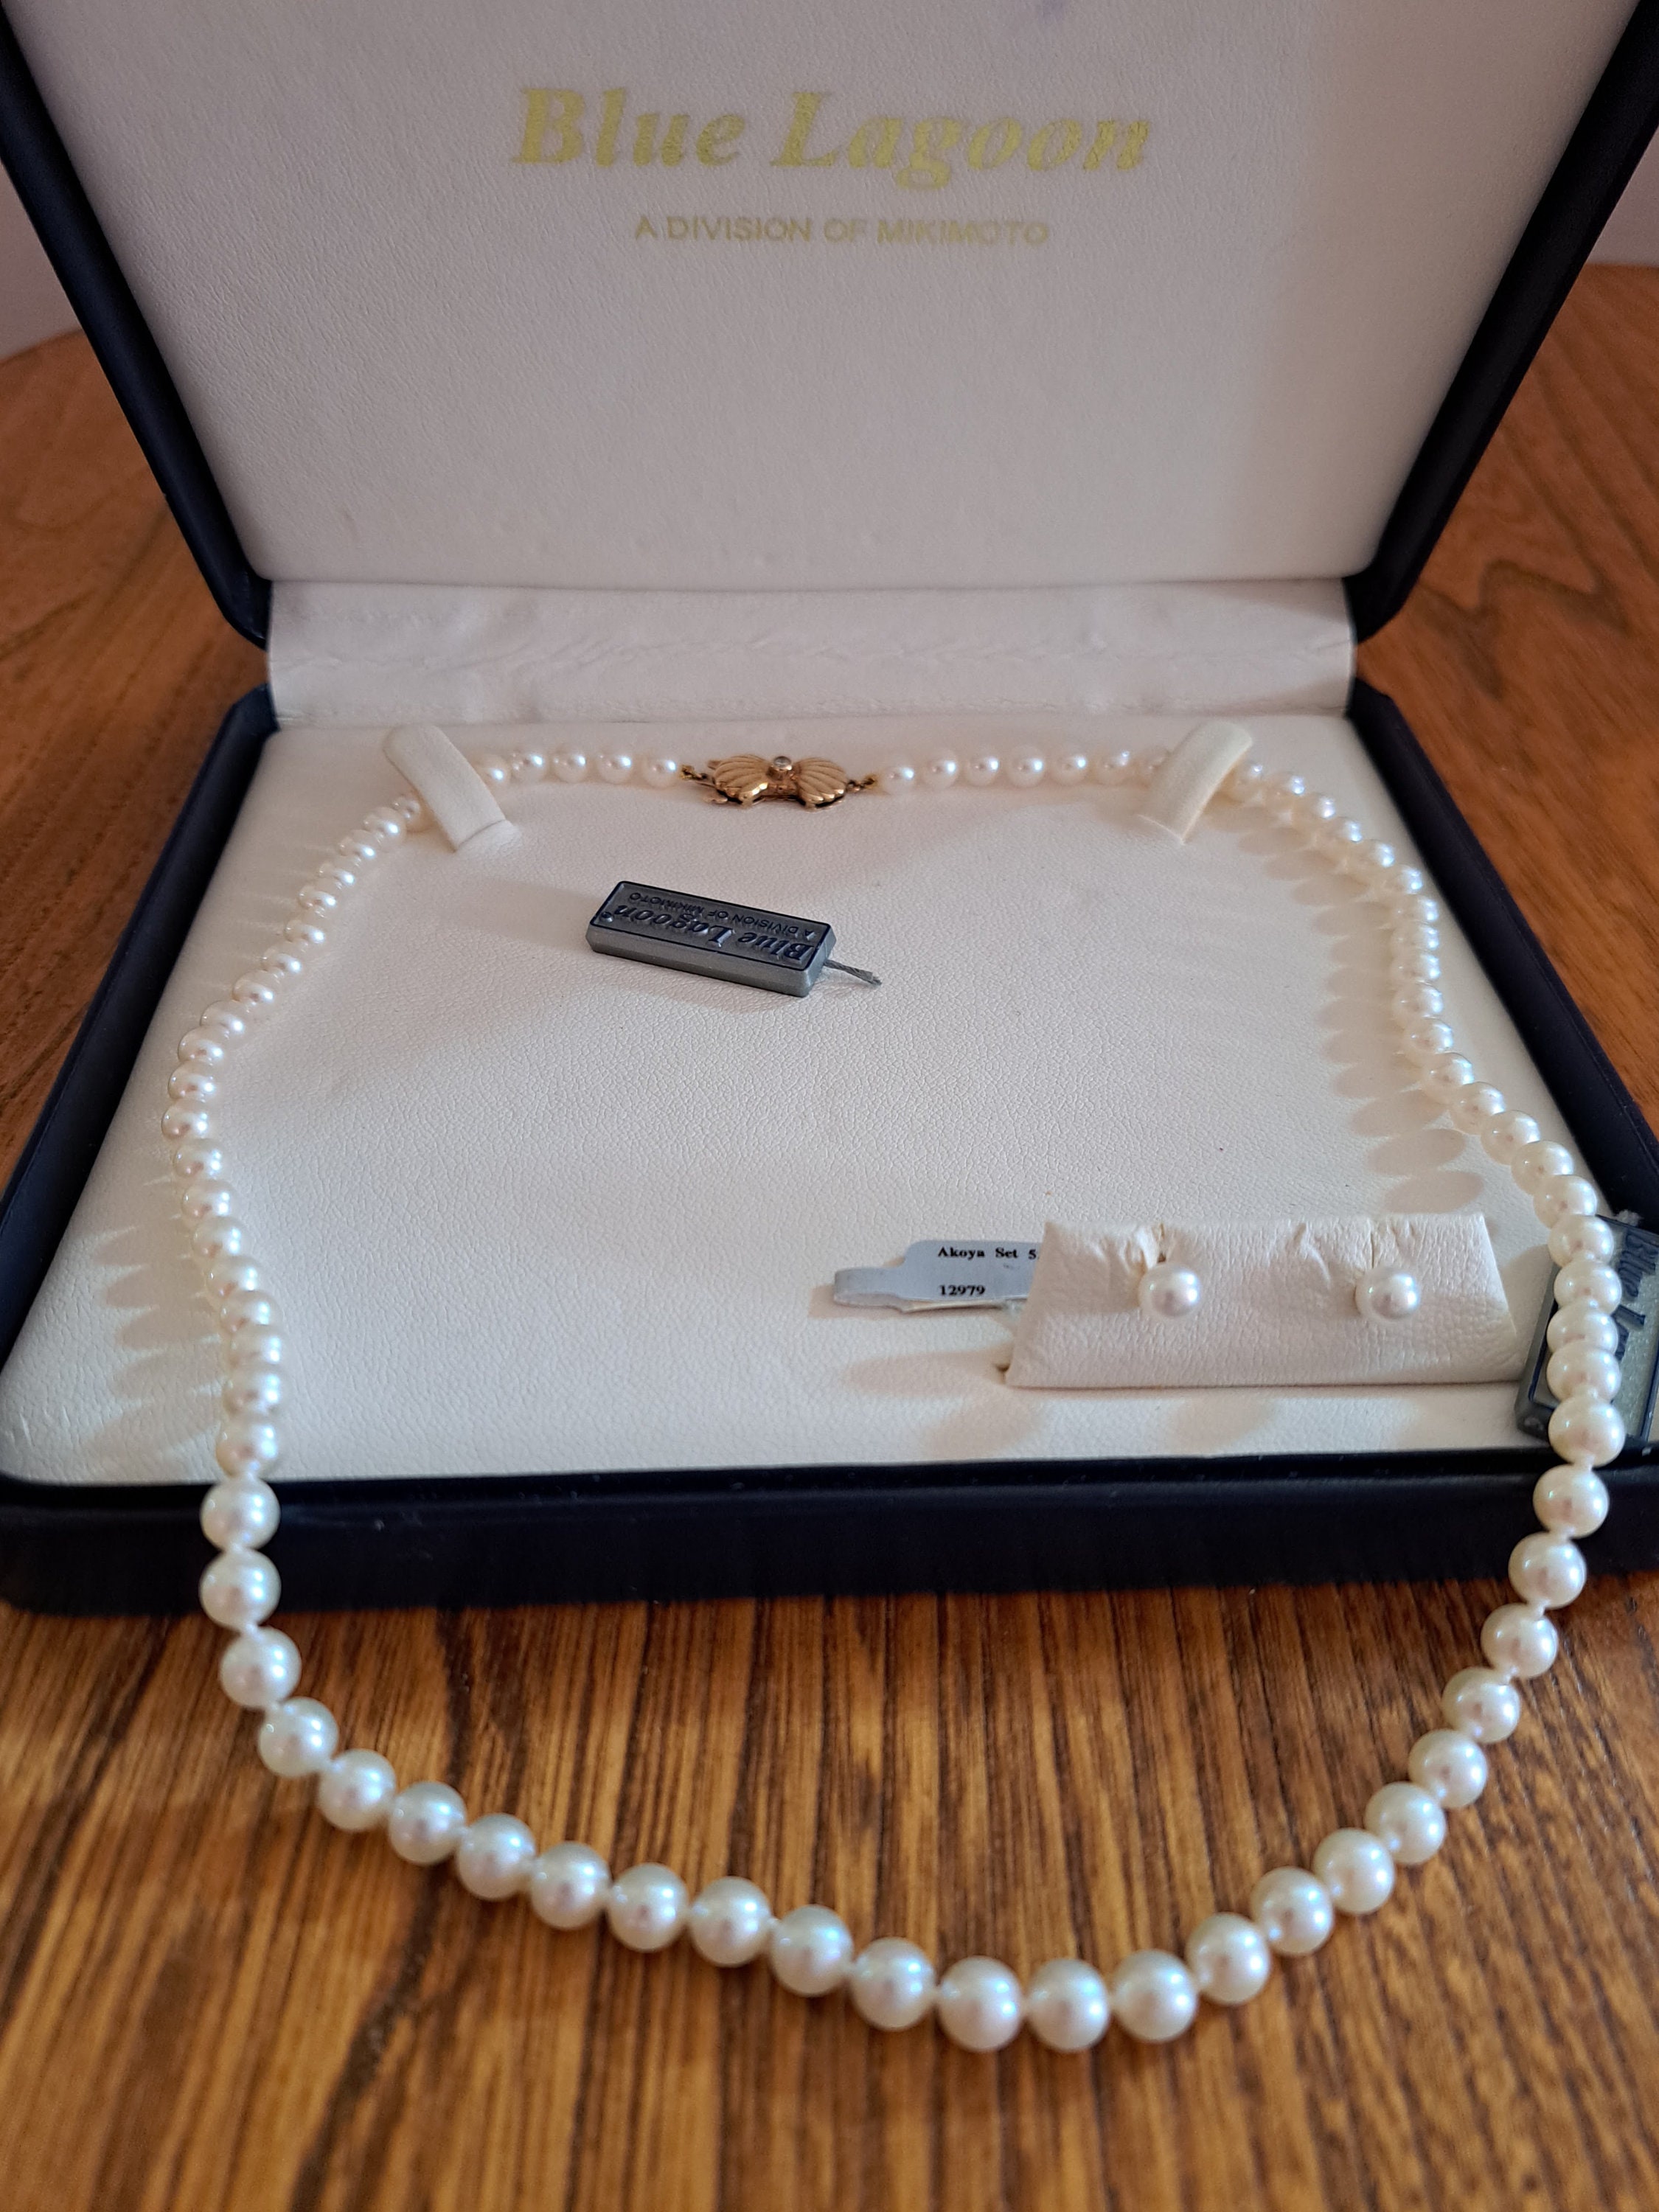 Sold At Auction: 14K YELLOW GOLD MIKIMOTO BLUE LAGOON PEARL, 48% OFF